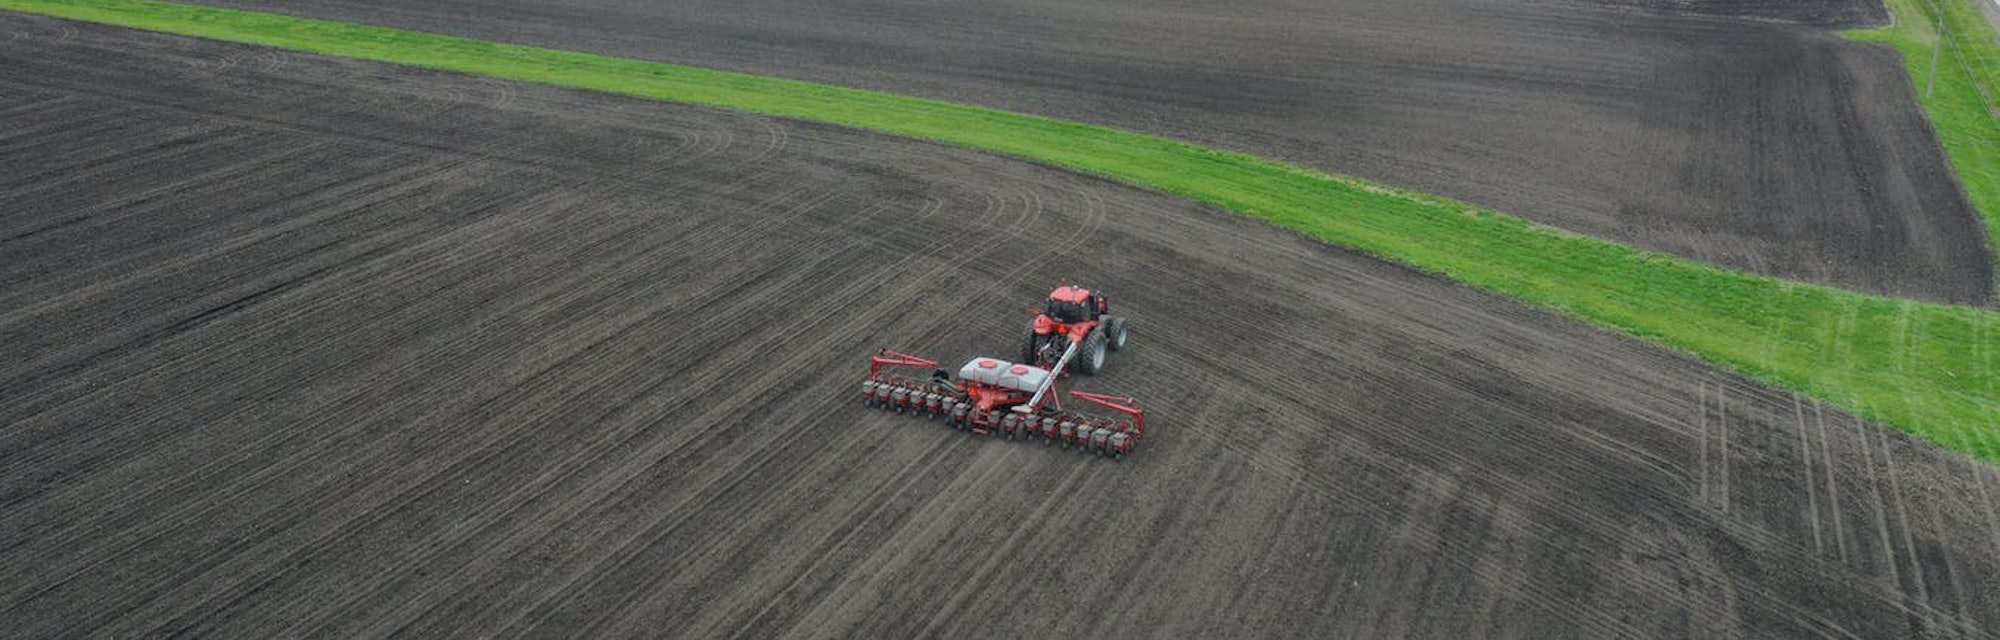 Planting corn near Dwight, Ill., April 23, 2020. Virtually all corn seeds planted in the U.S. are co...